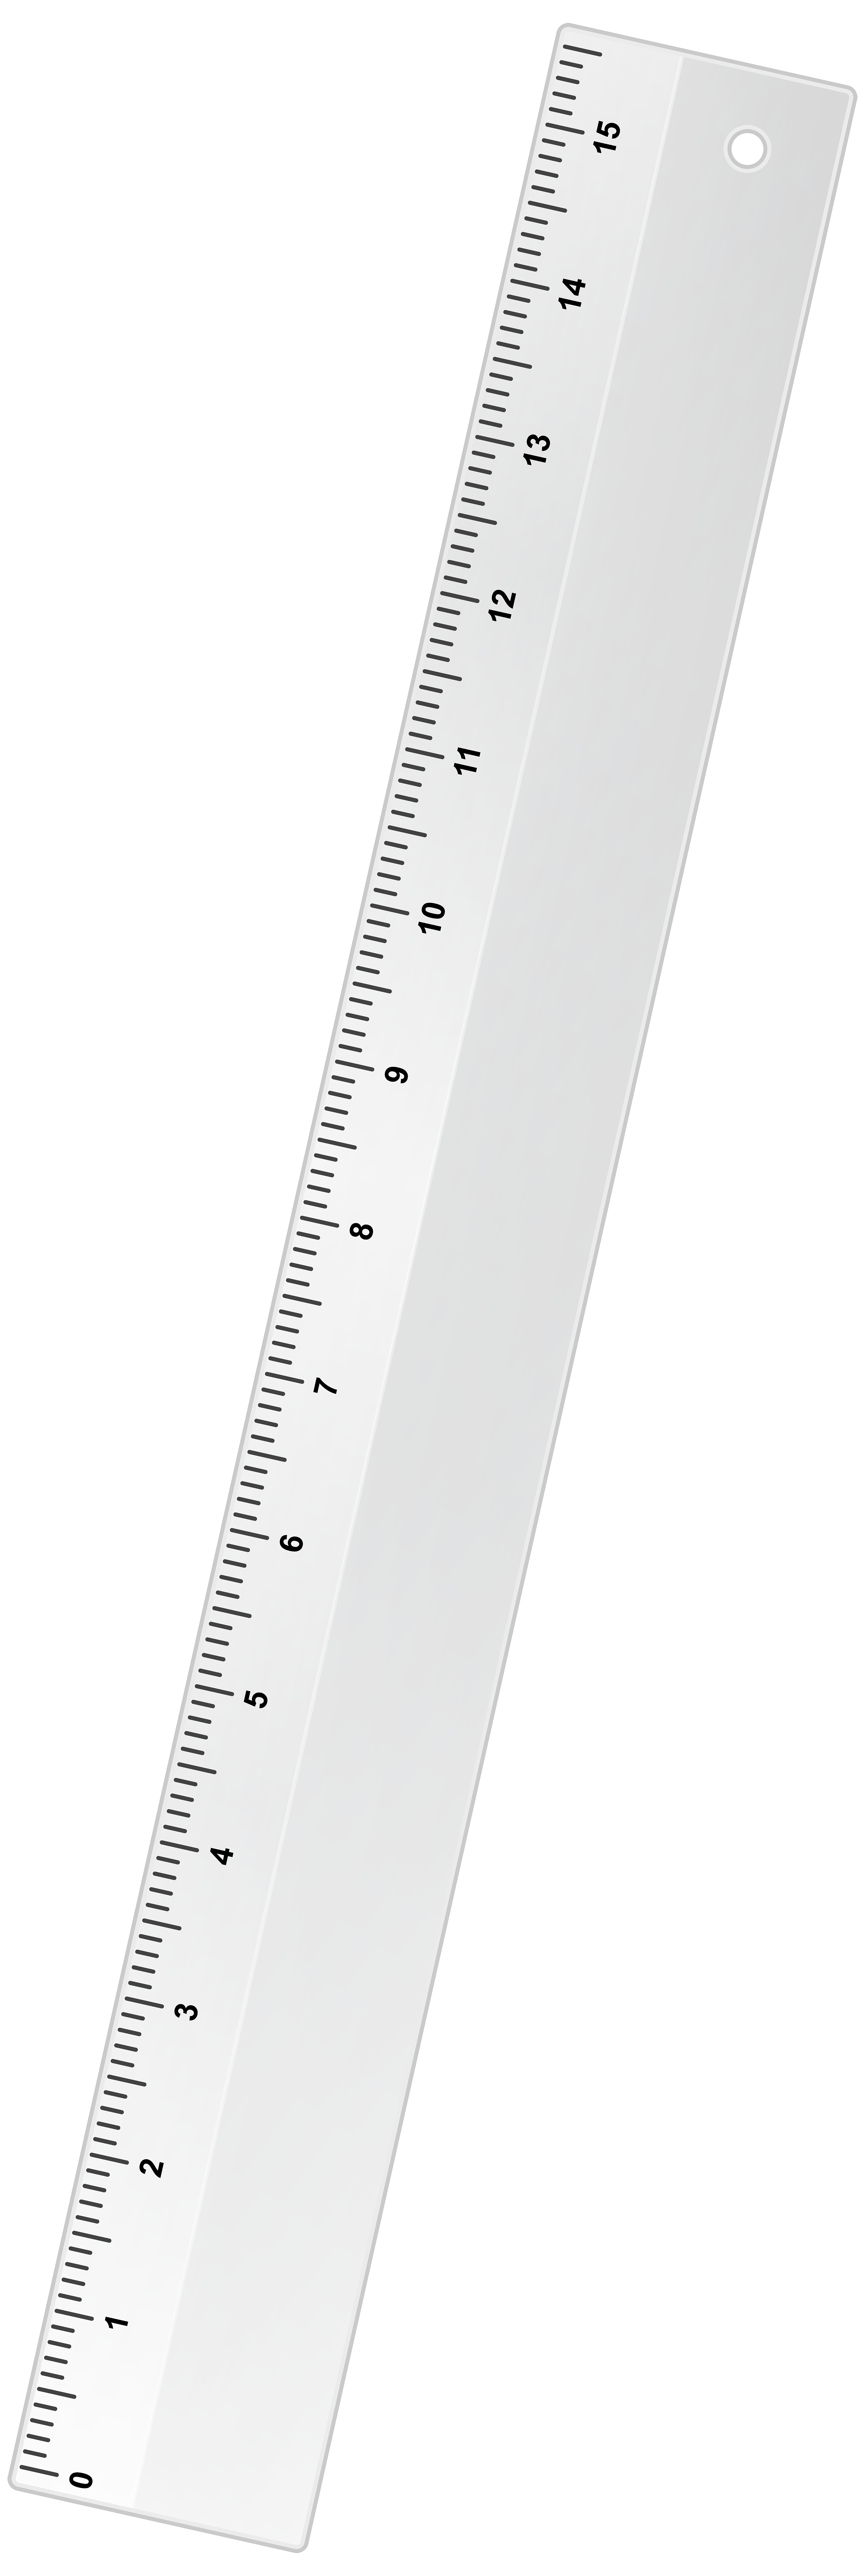 Paper Black And White Angle Font Ruler Transparent Png Clip Art Image